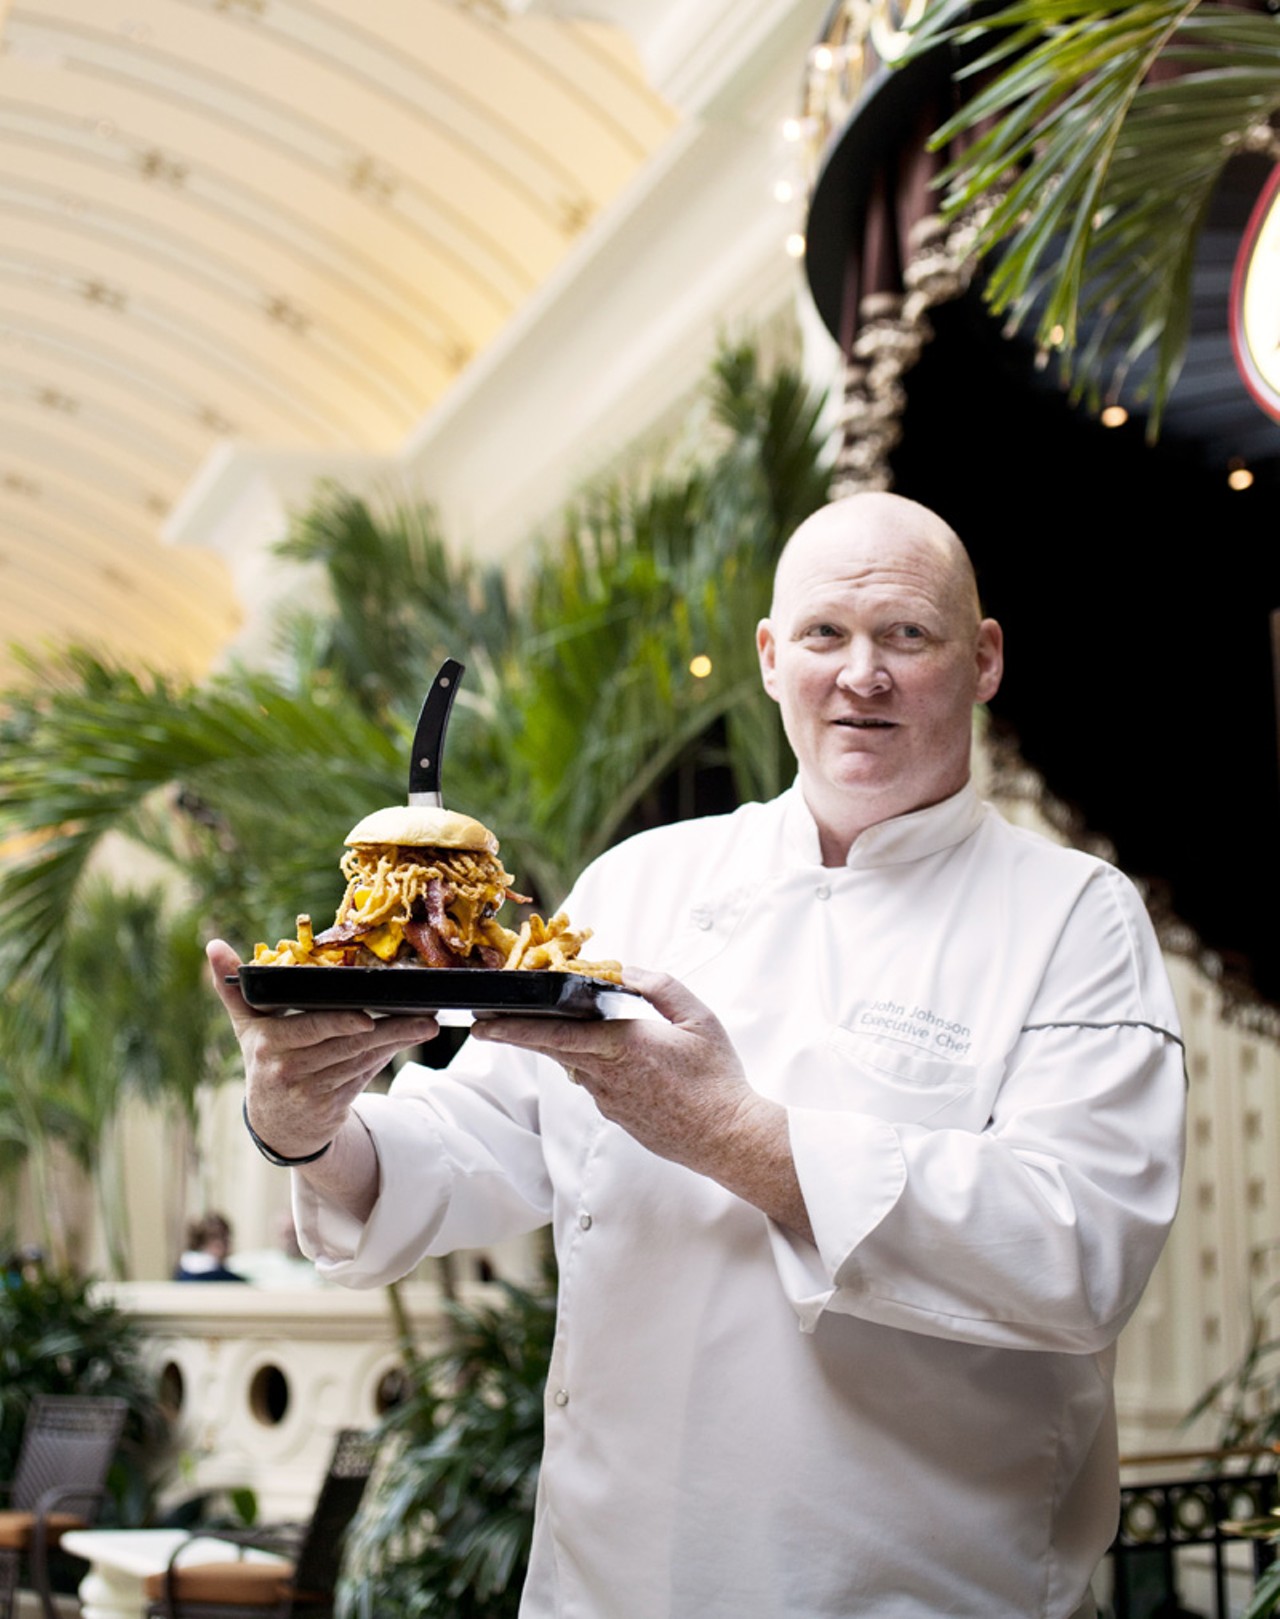 Executive Chef John Johnson oversees 10 restaurants and 2 coffee shops between River City and Lumiere Casinos. Here, he is shown holding the Triple Bypass burger.